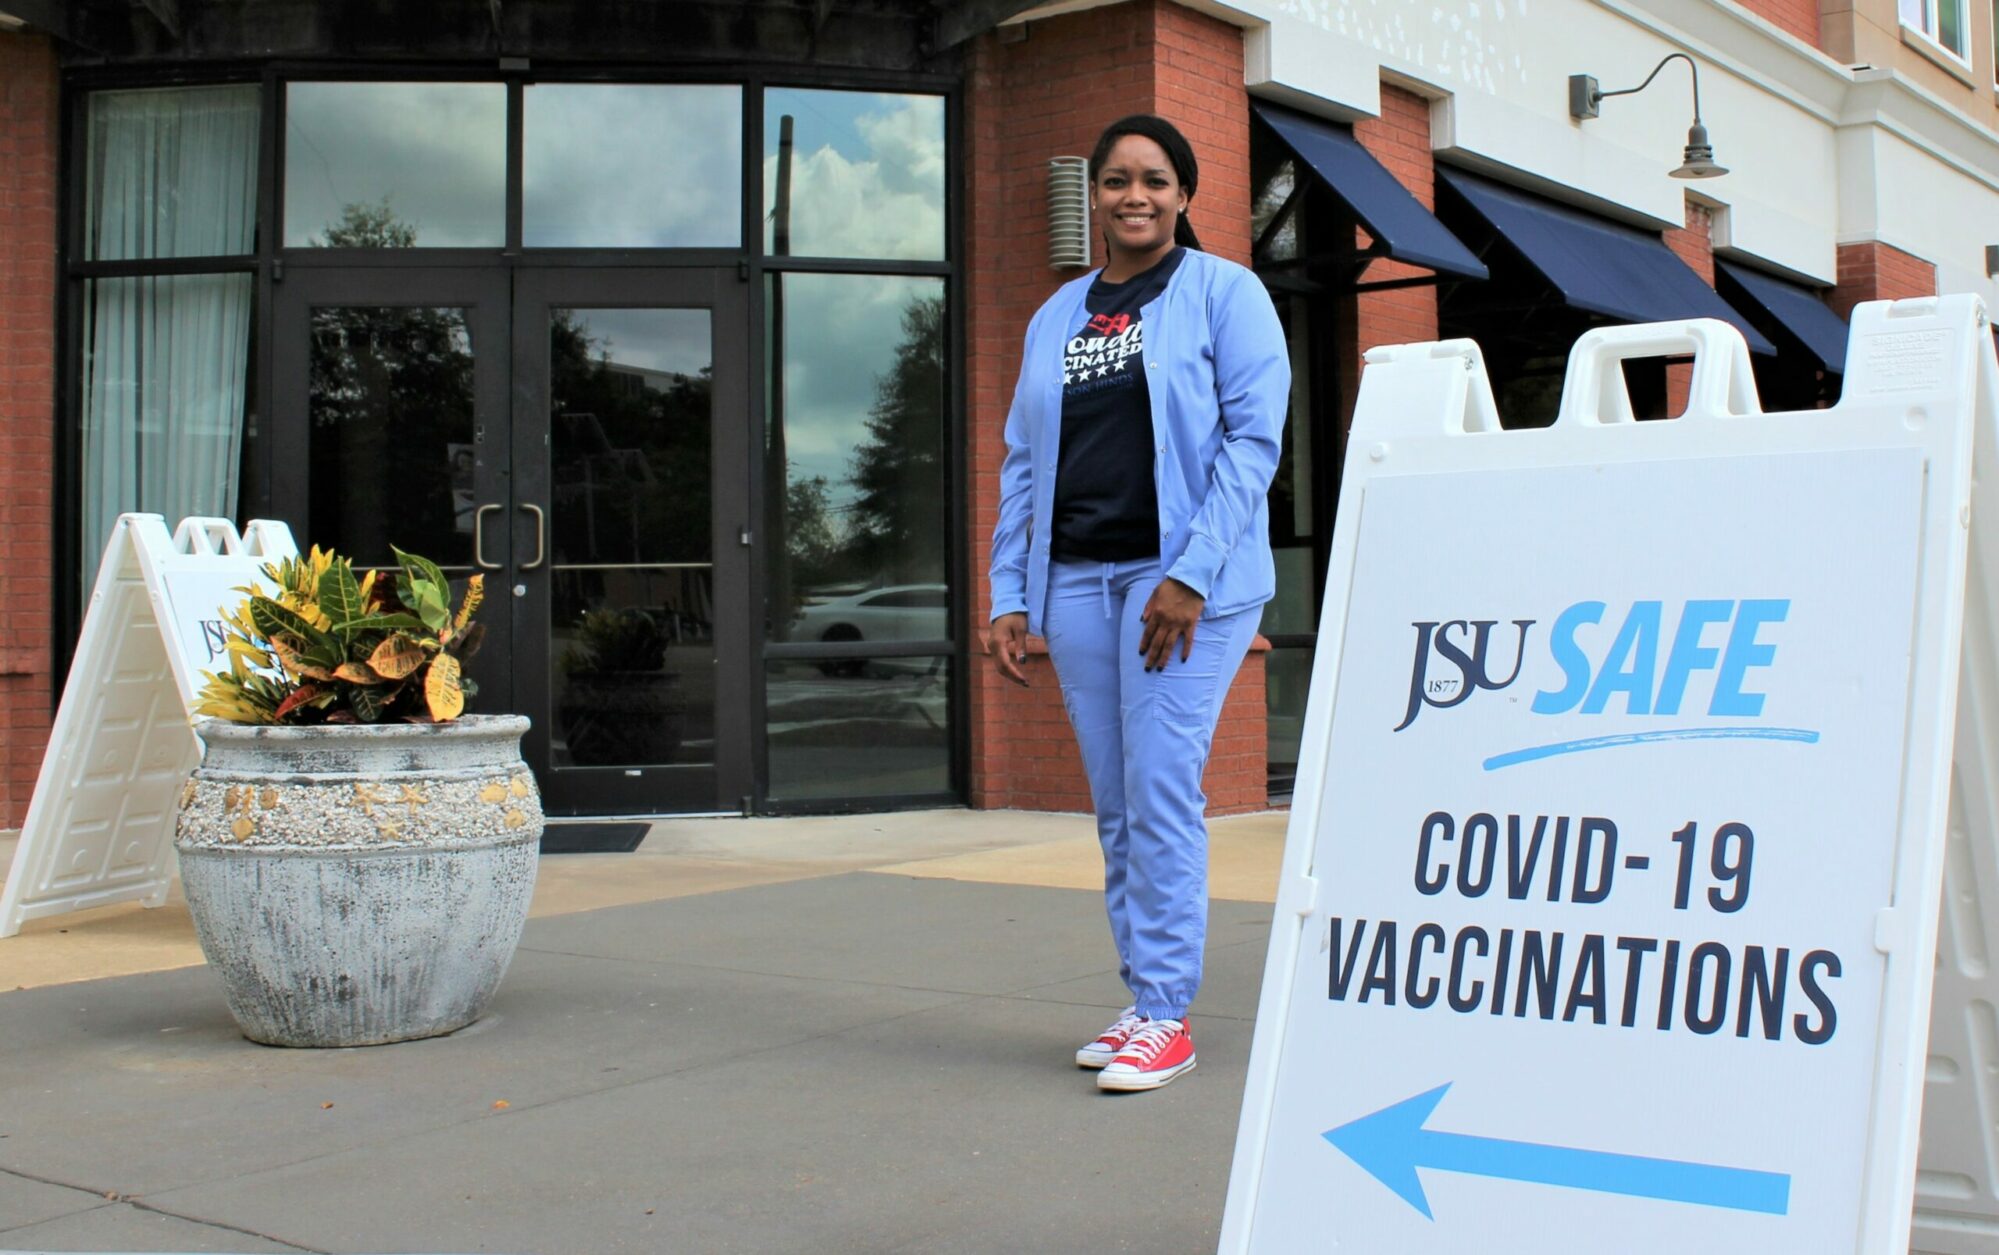 Michelle Owens Michelle Owens with the Jackson-Hinds Comprehensive Health Center stands in front of a COVID-19 vaccination clinic at Jackson State University